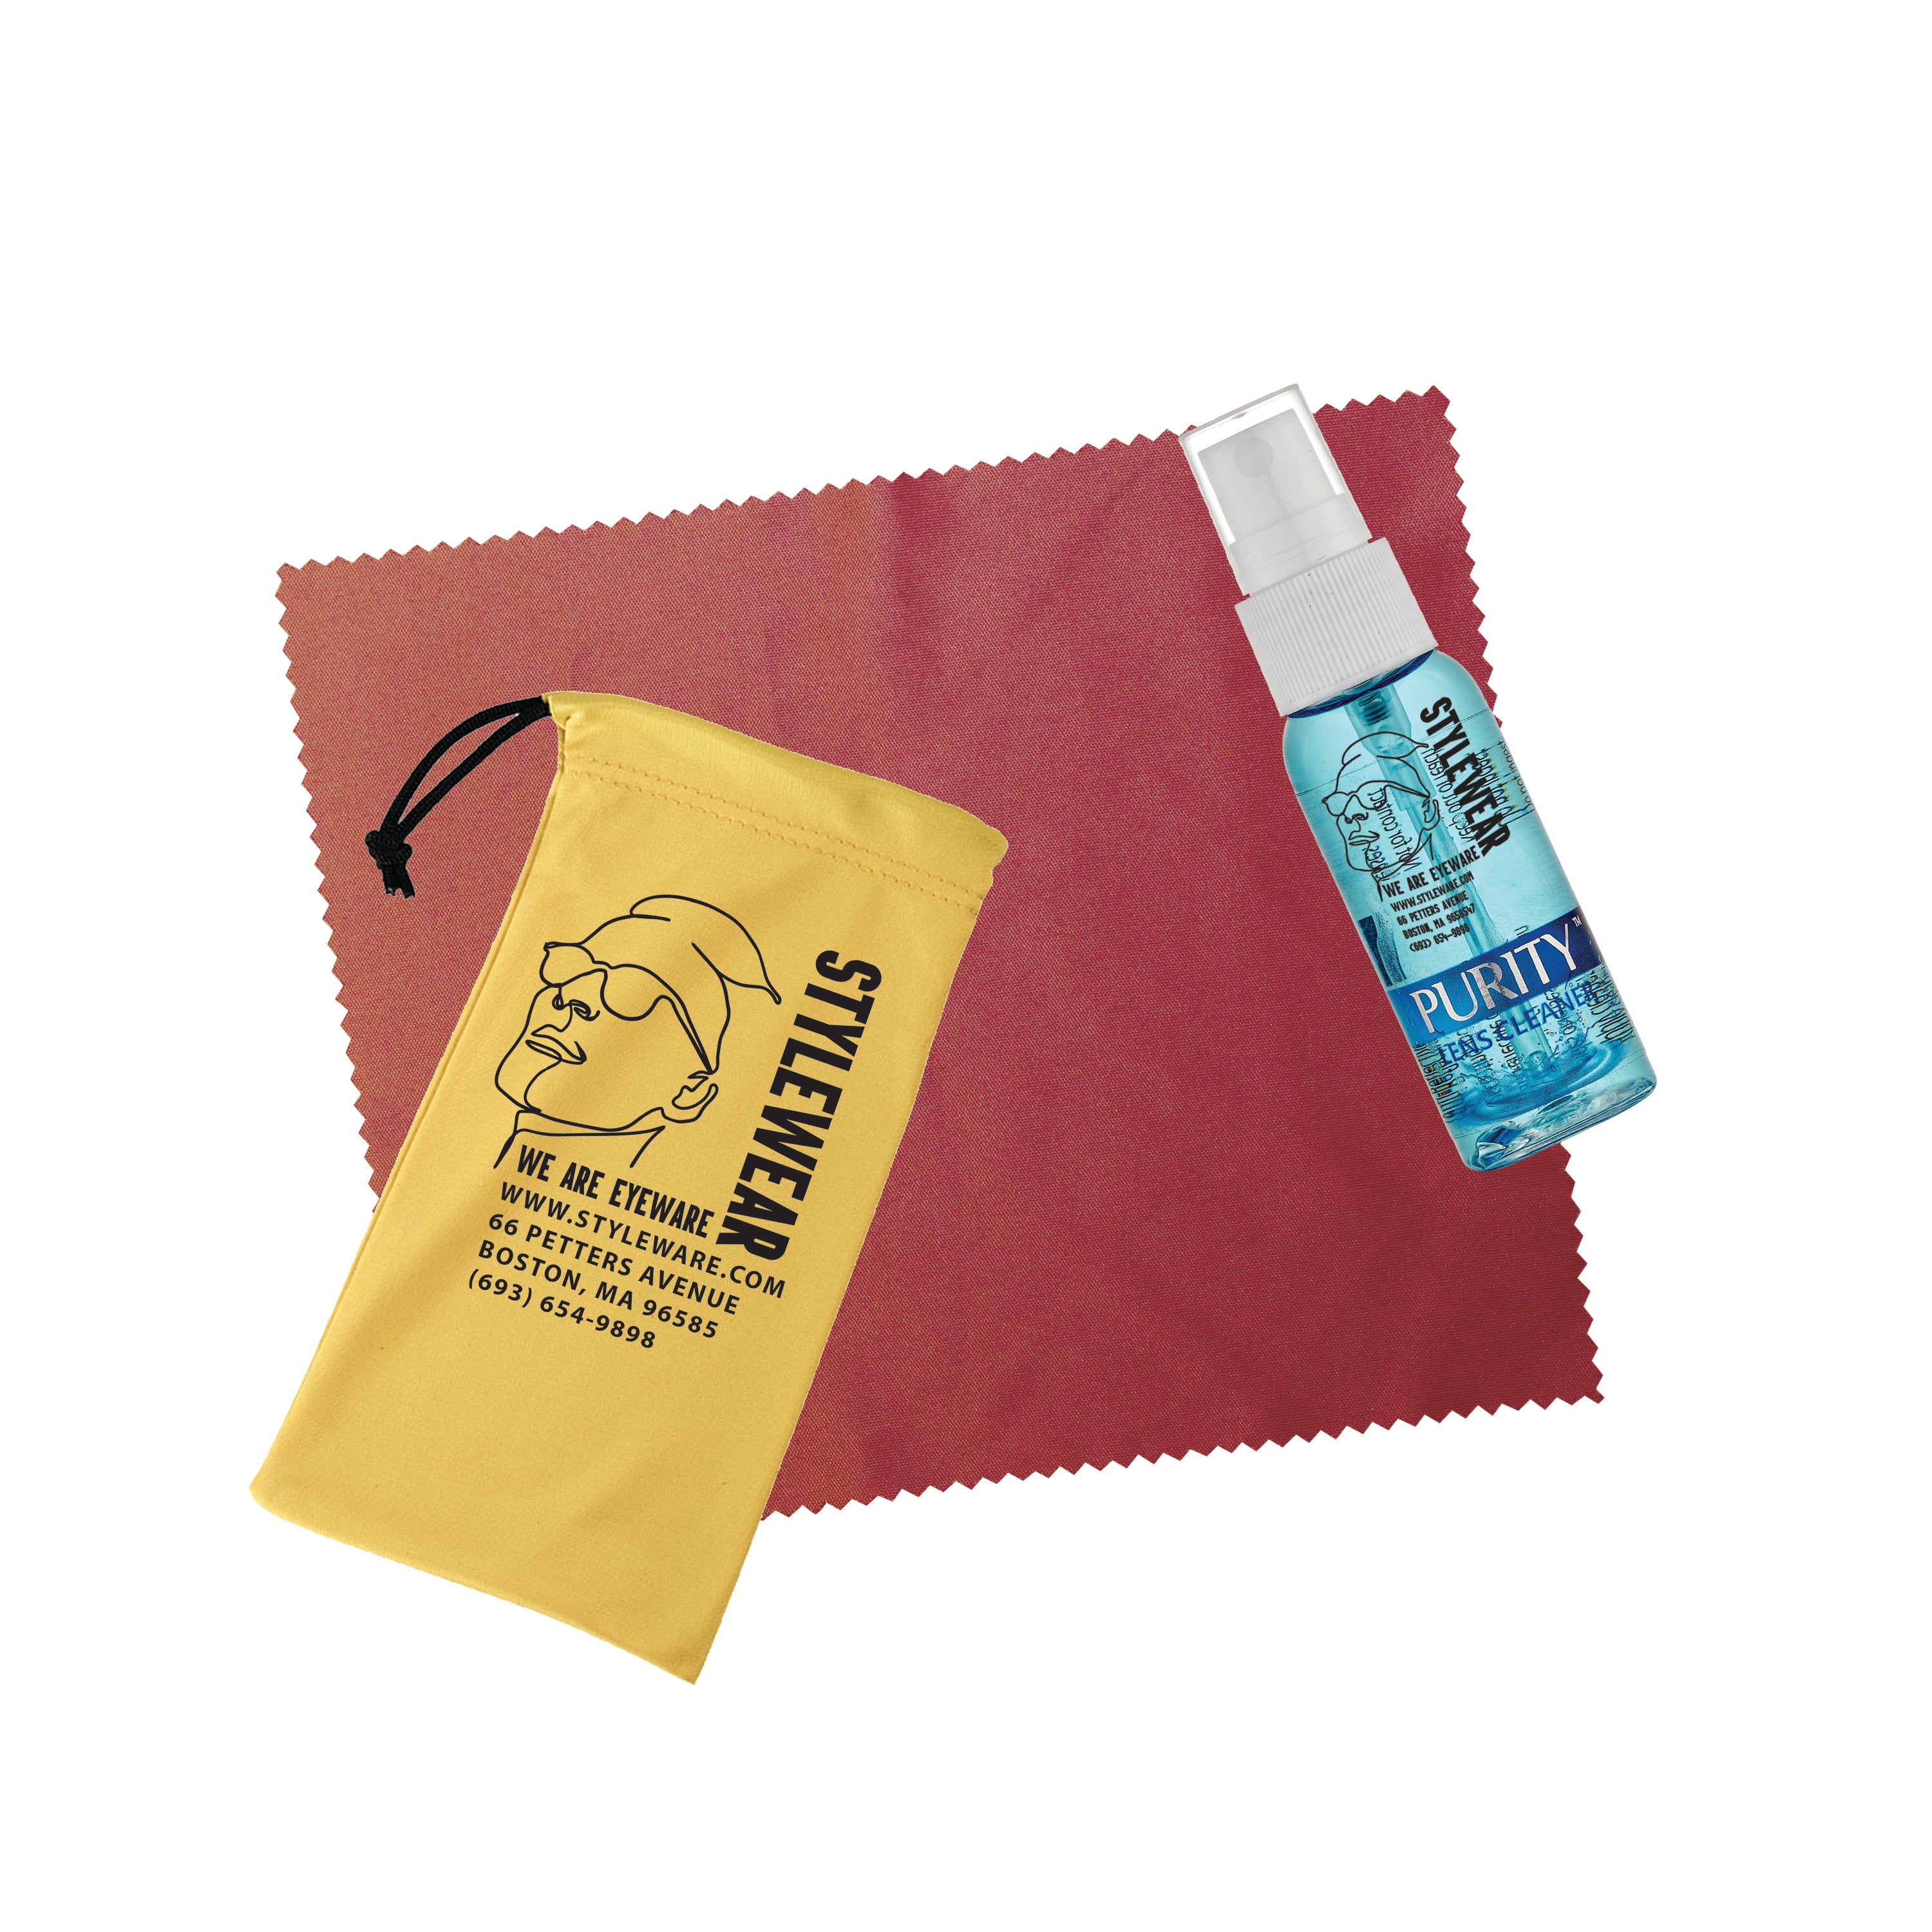 1 oz. Purity™ Imprinted Pouch Kits